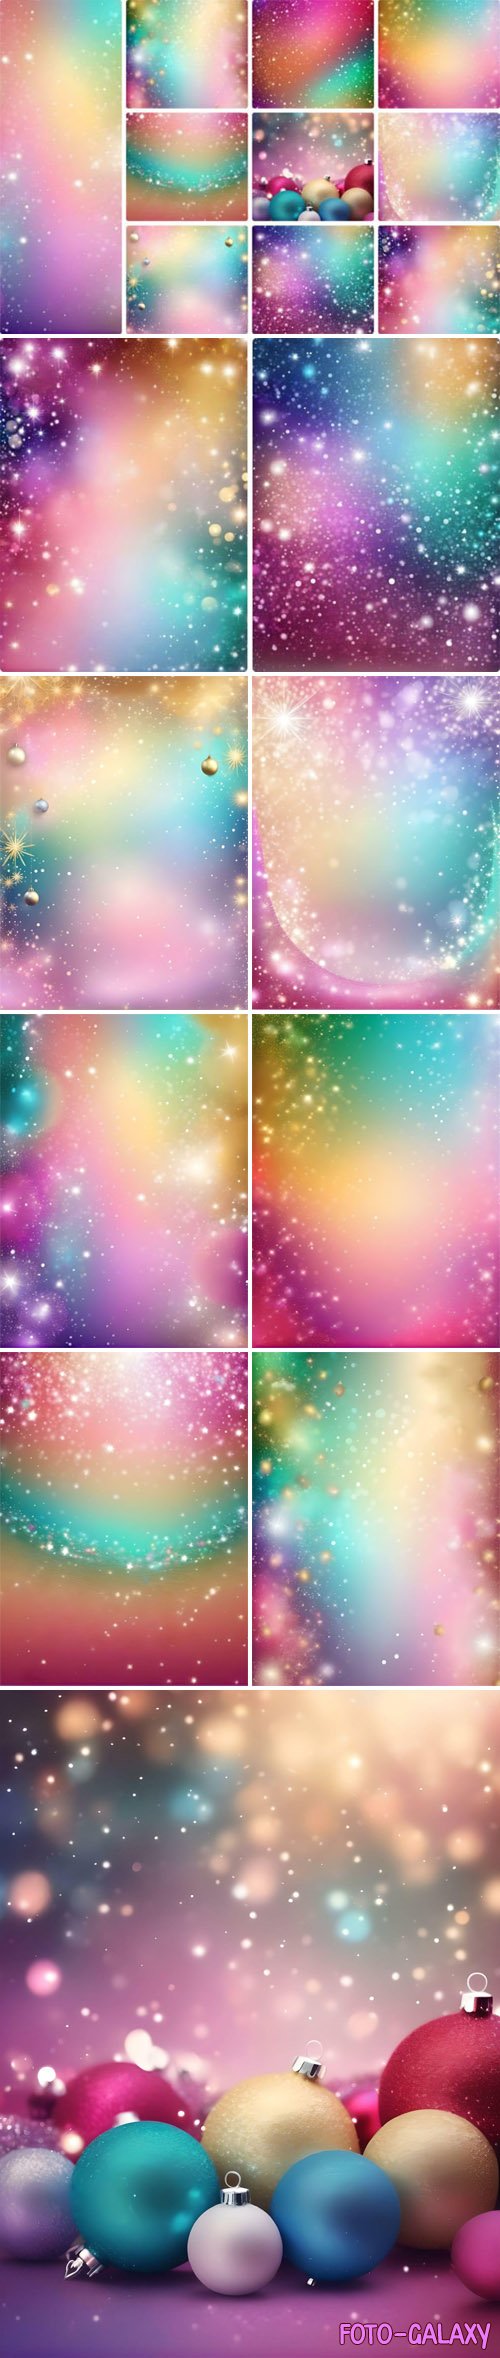 Holiday Gradient Backgrounds Collection